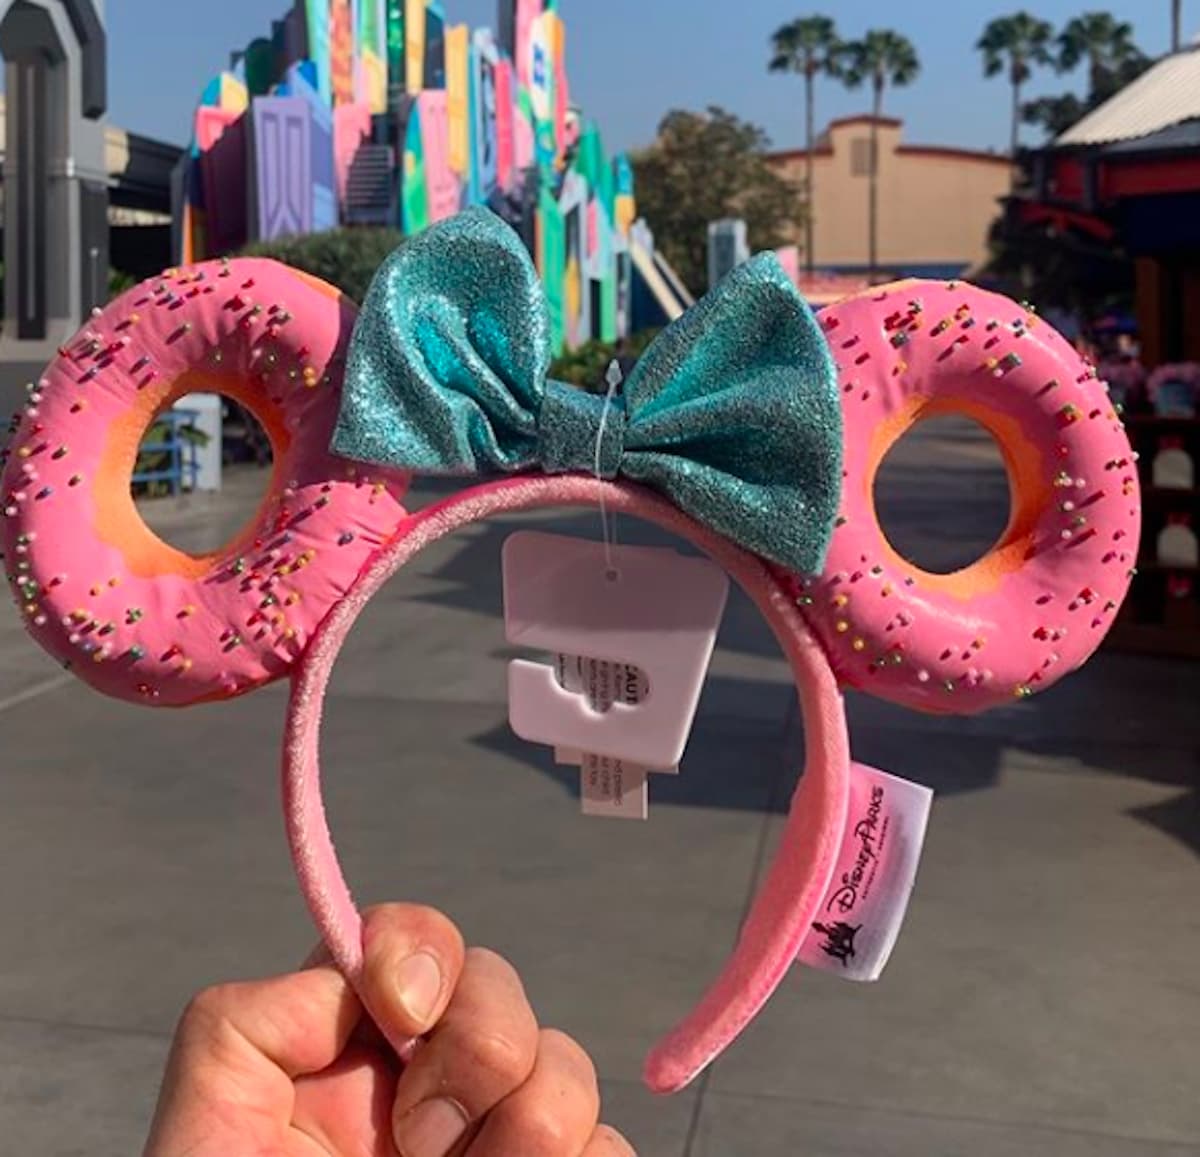 Disney World will sell designer Mickey and Minnie Mouse ears